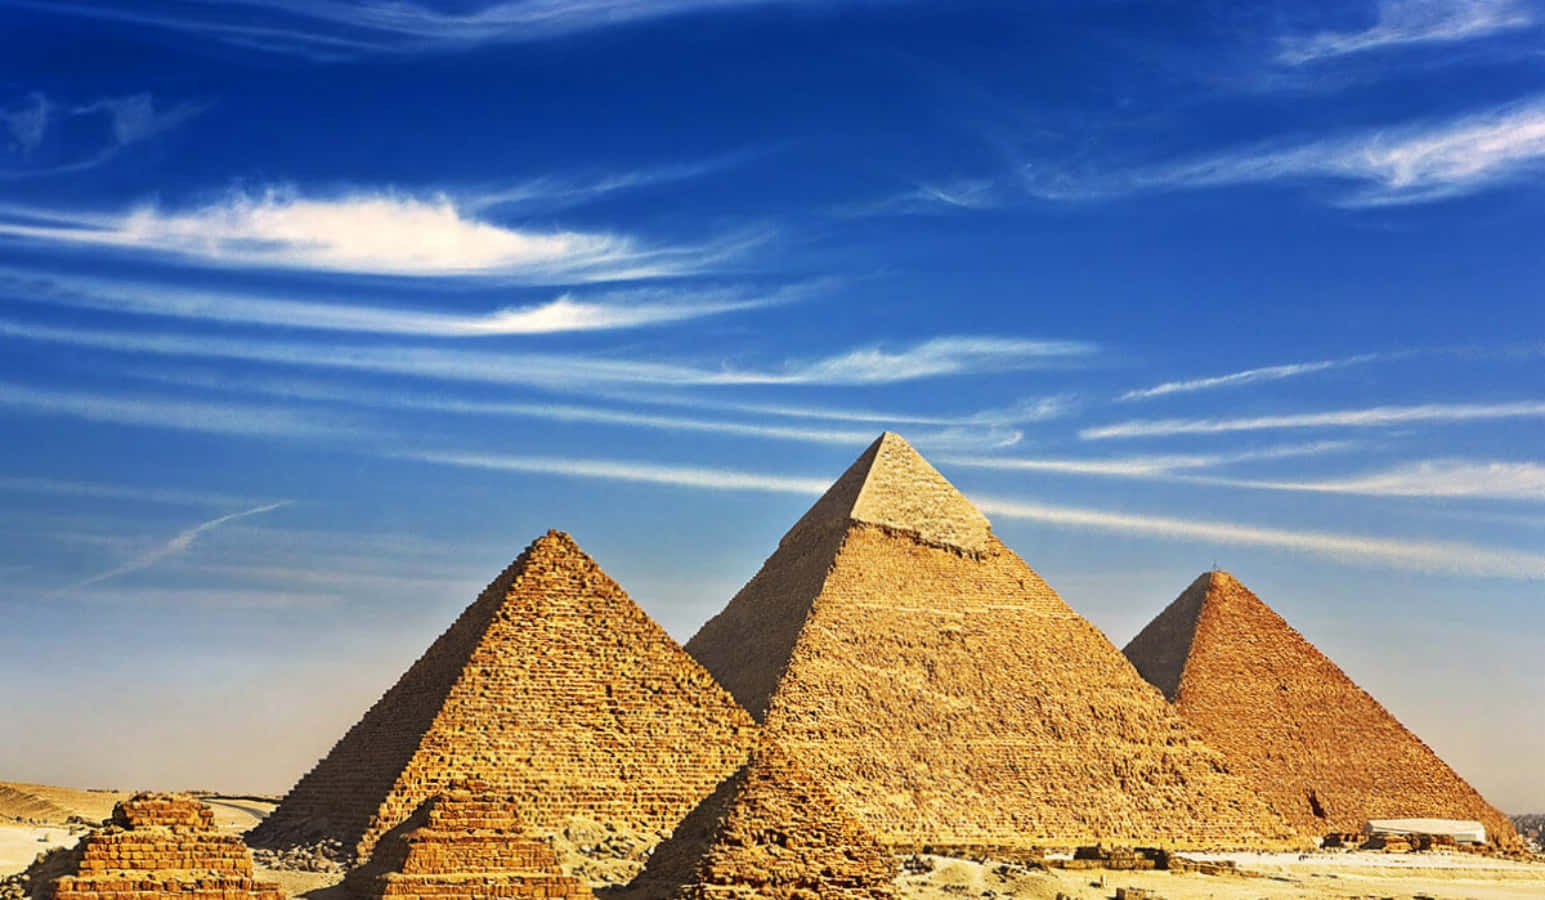 Enjoy the view of Cairo's iconic Pyramids.